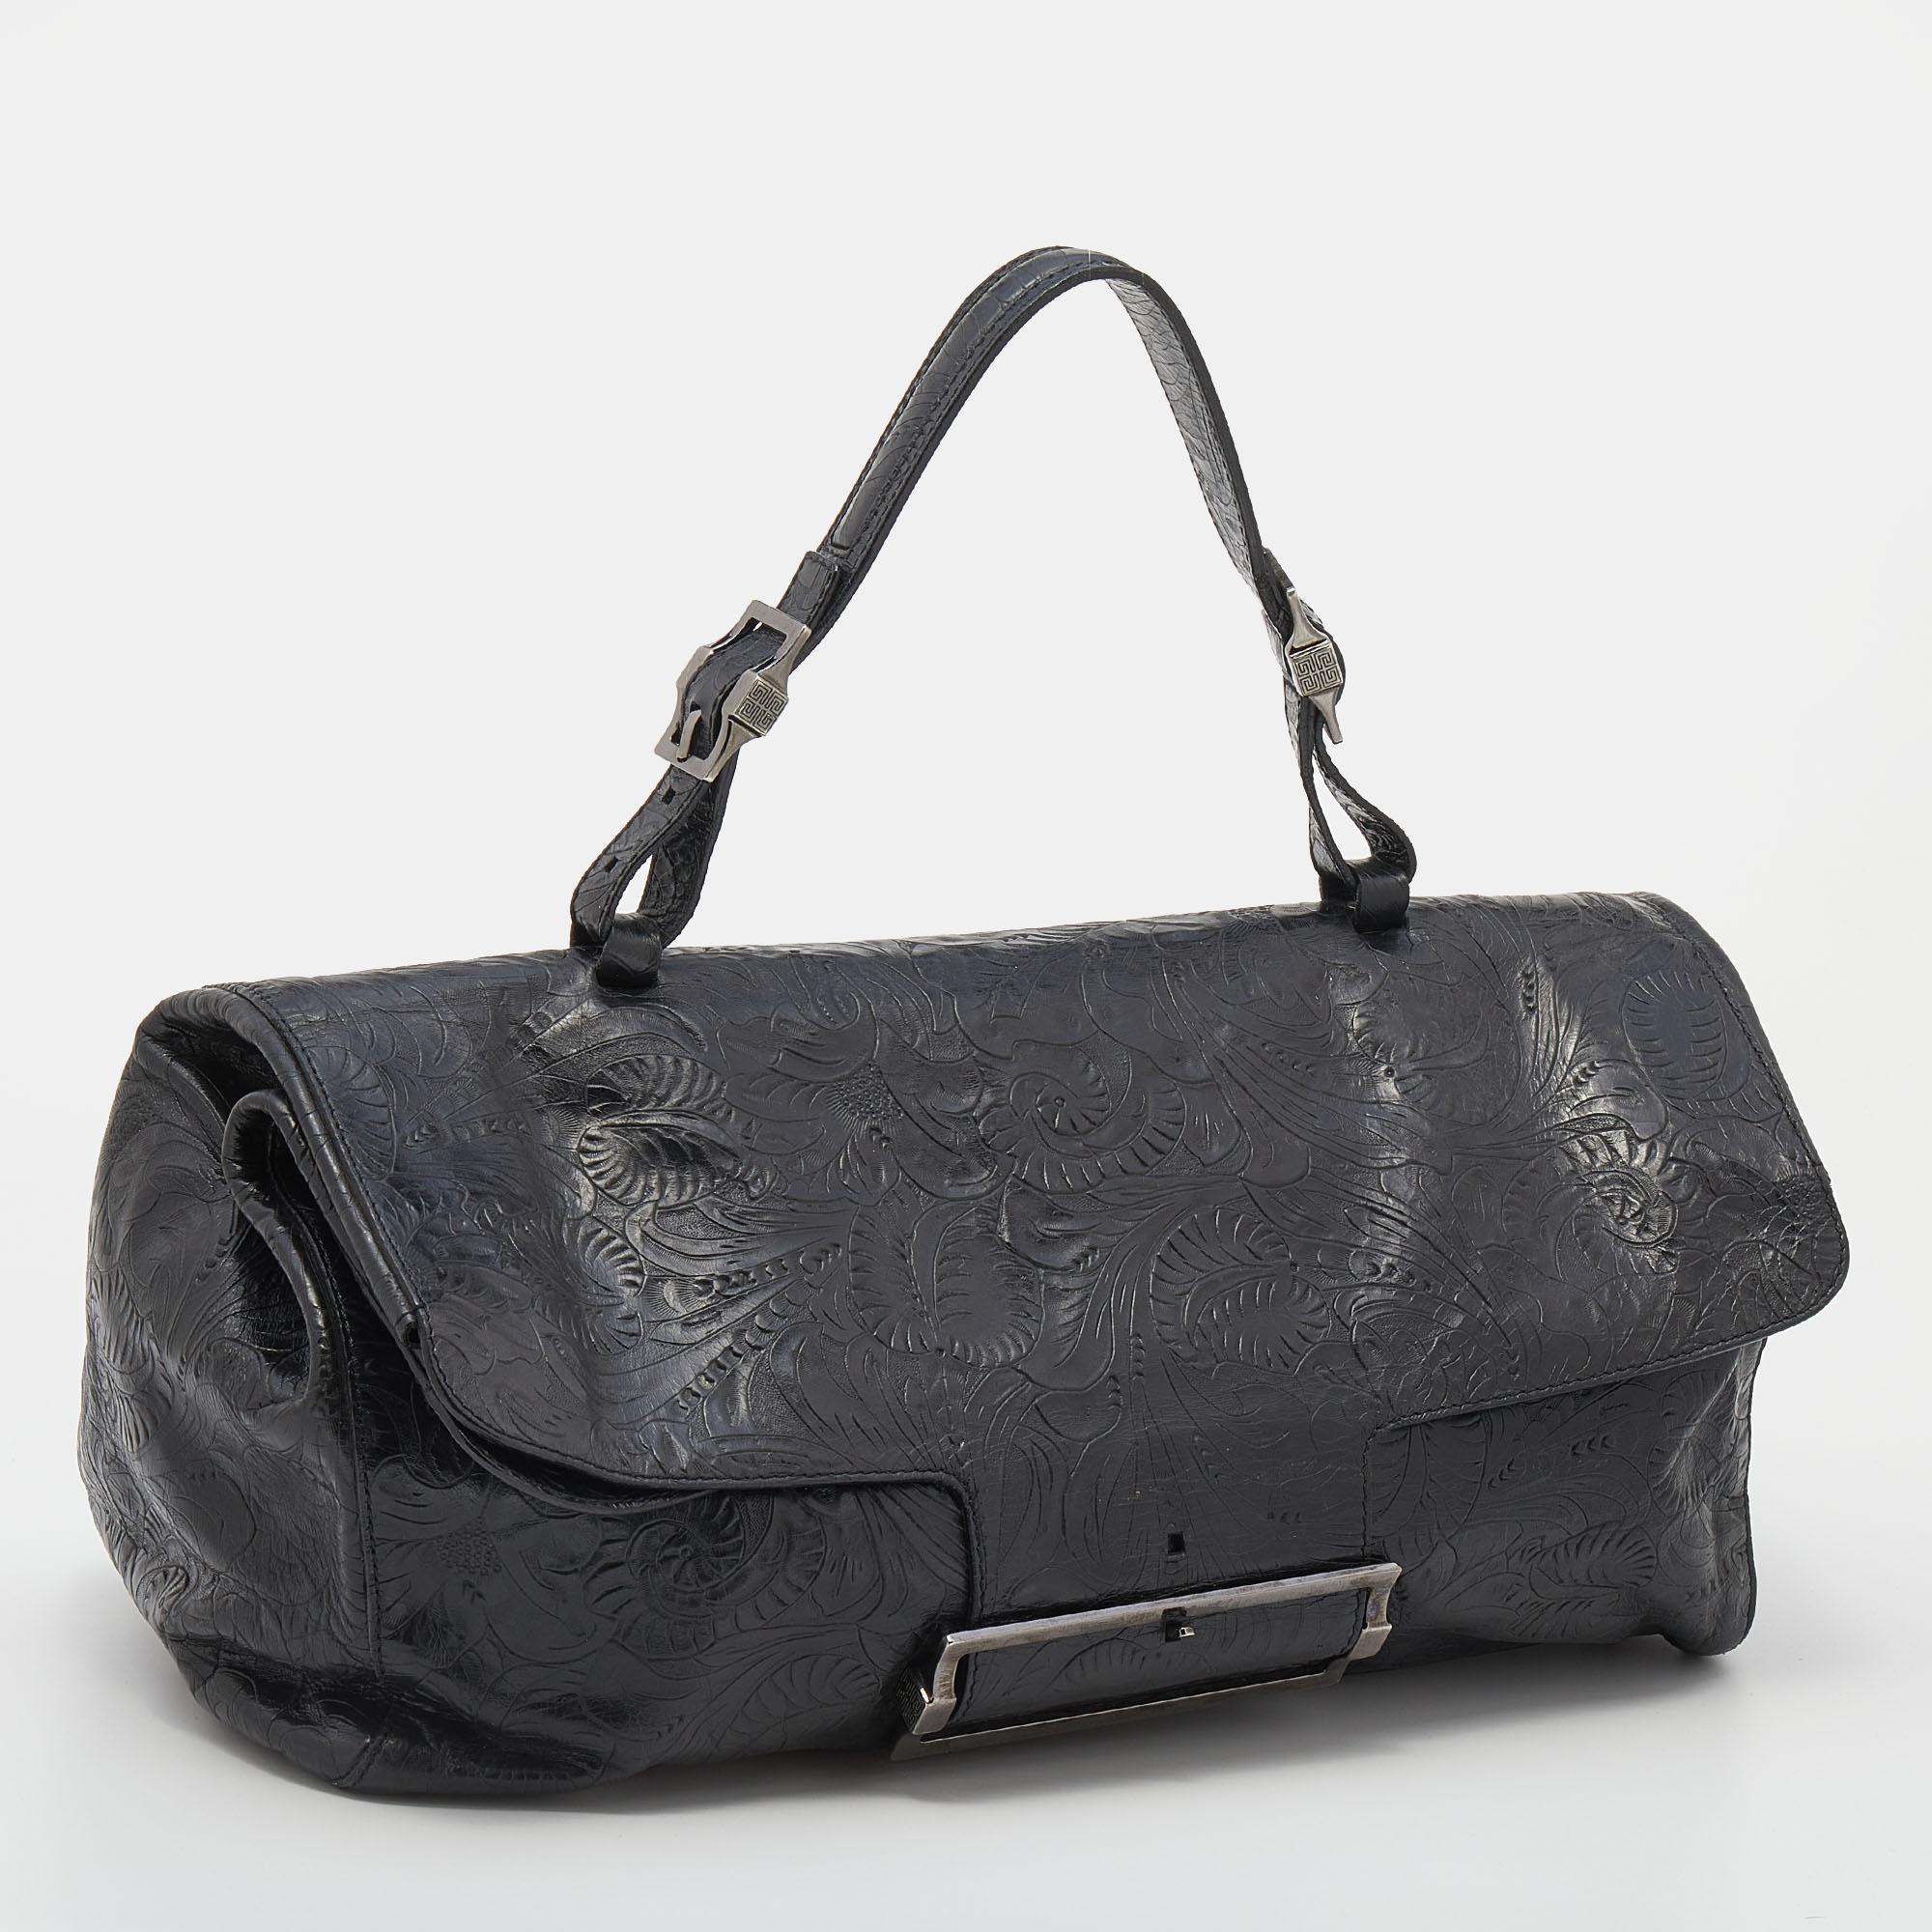 Women's Givenchy Black Paisley Embossed Leather Top Handle Bag